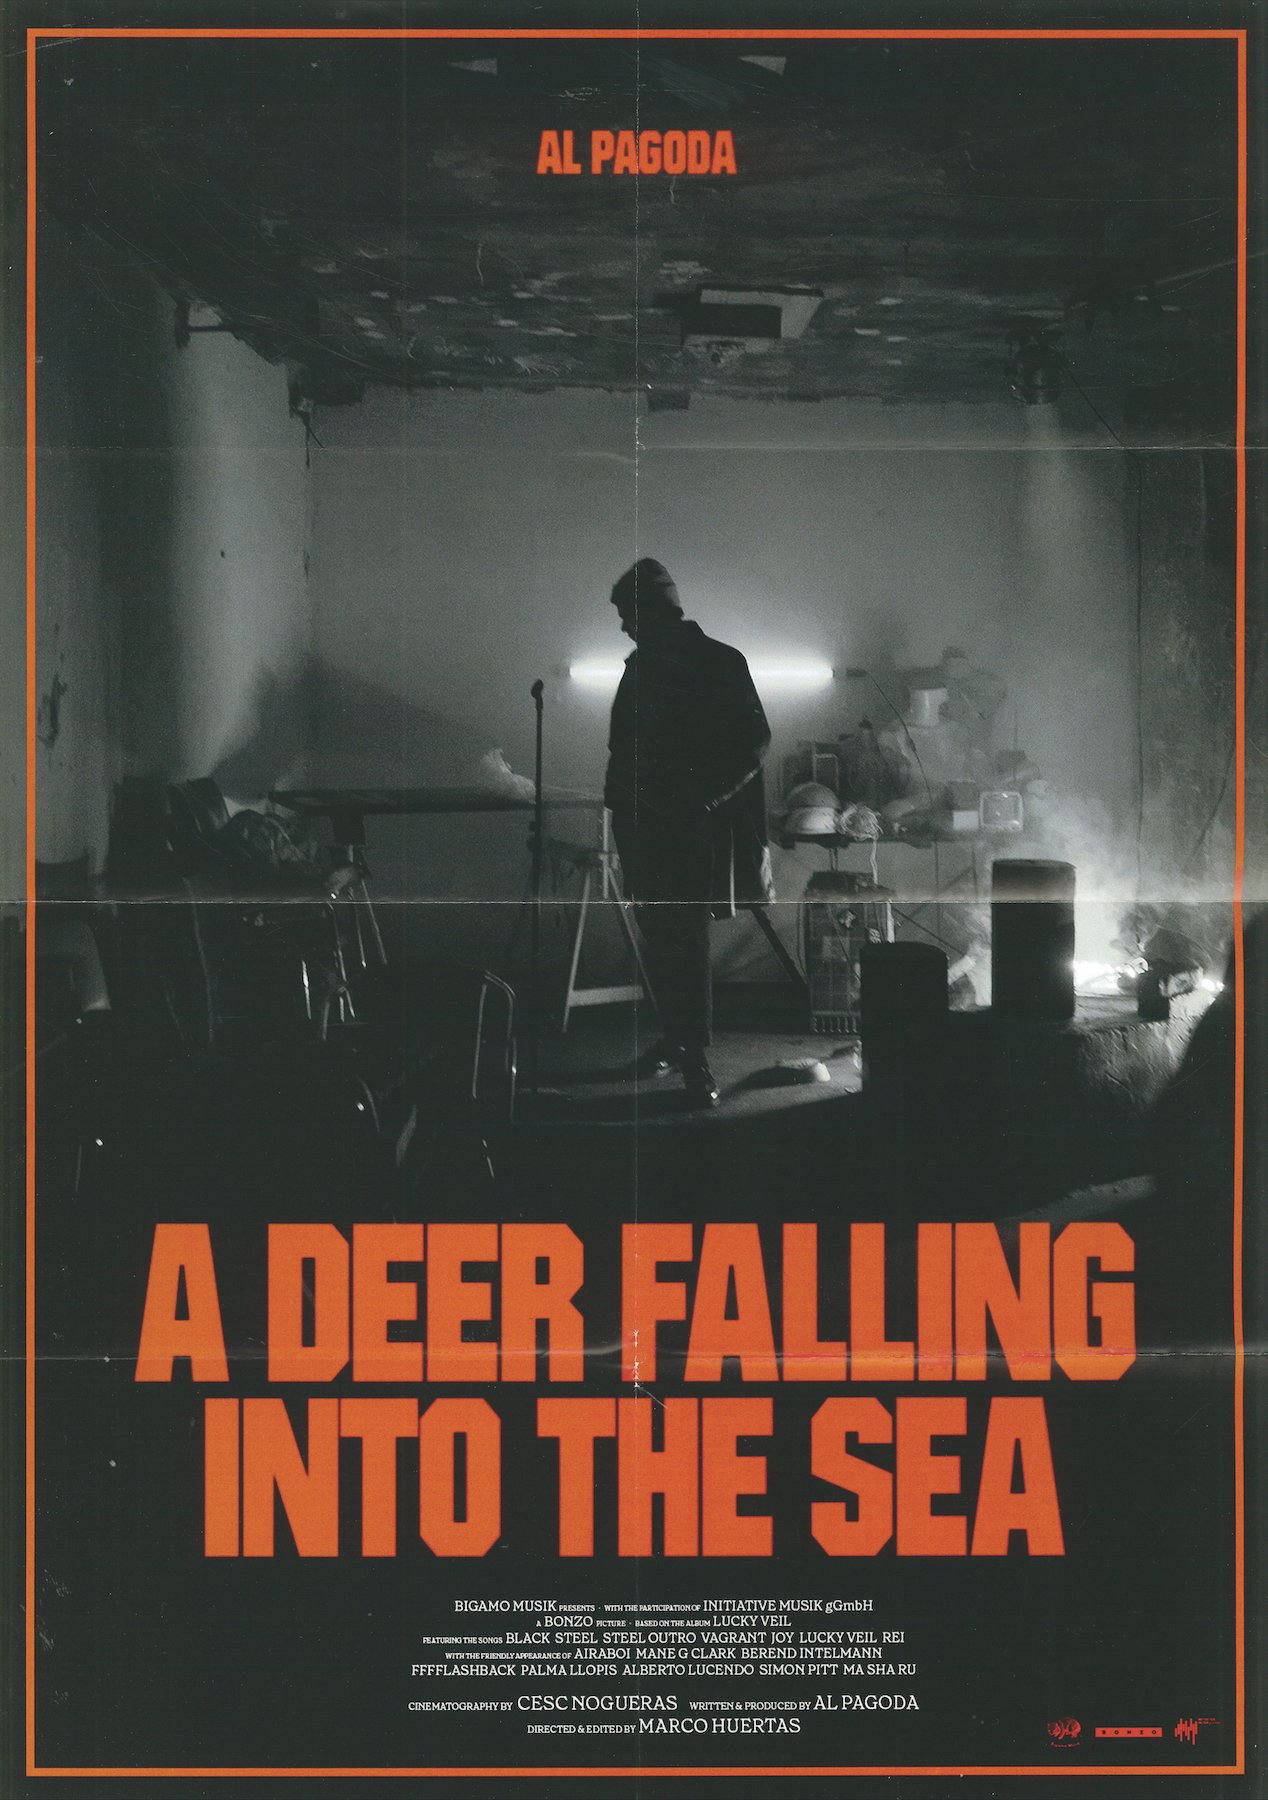 278-poster_A deer falling into the sea